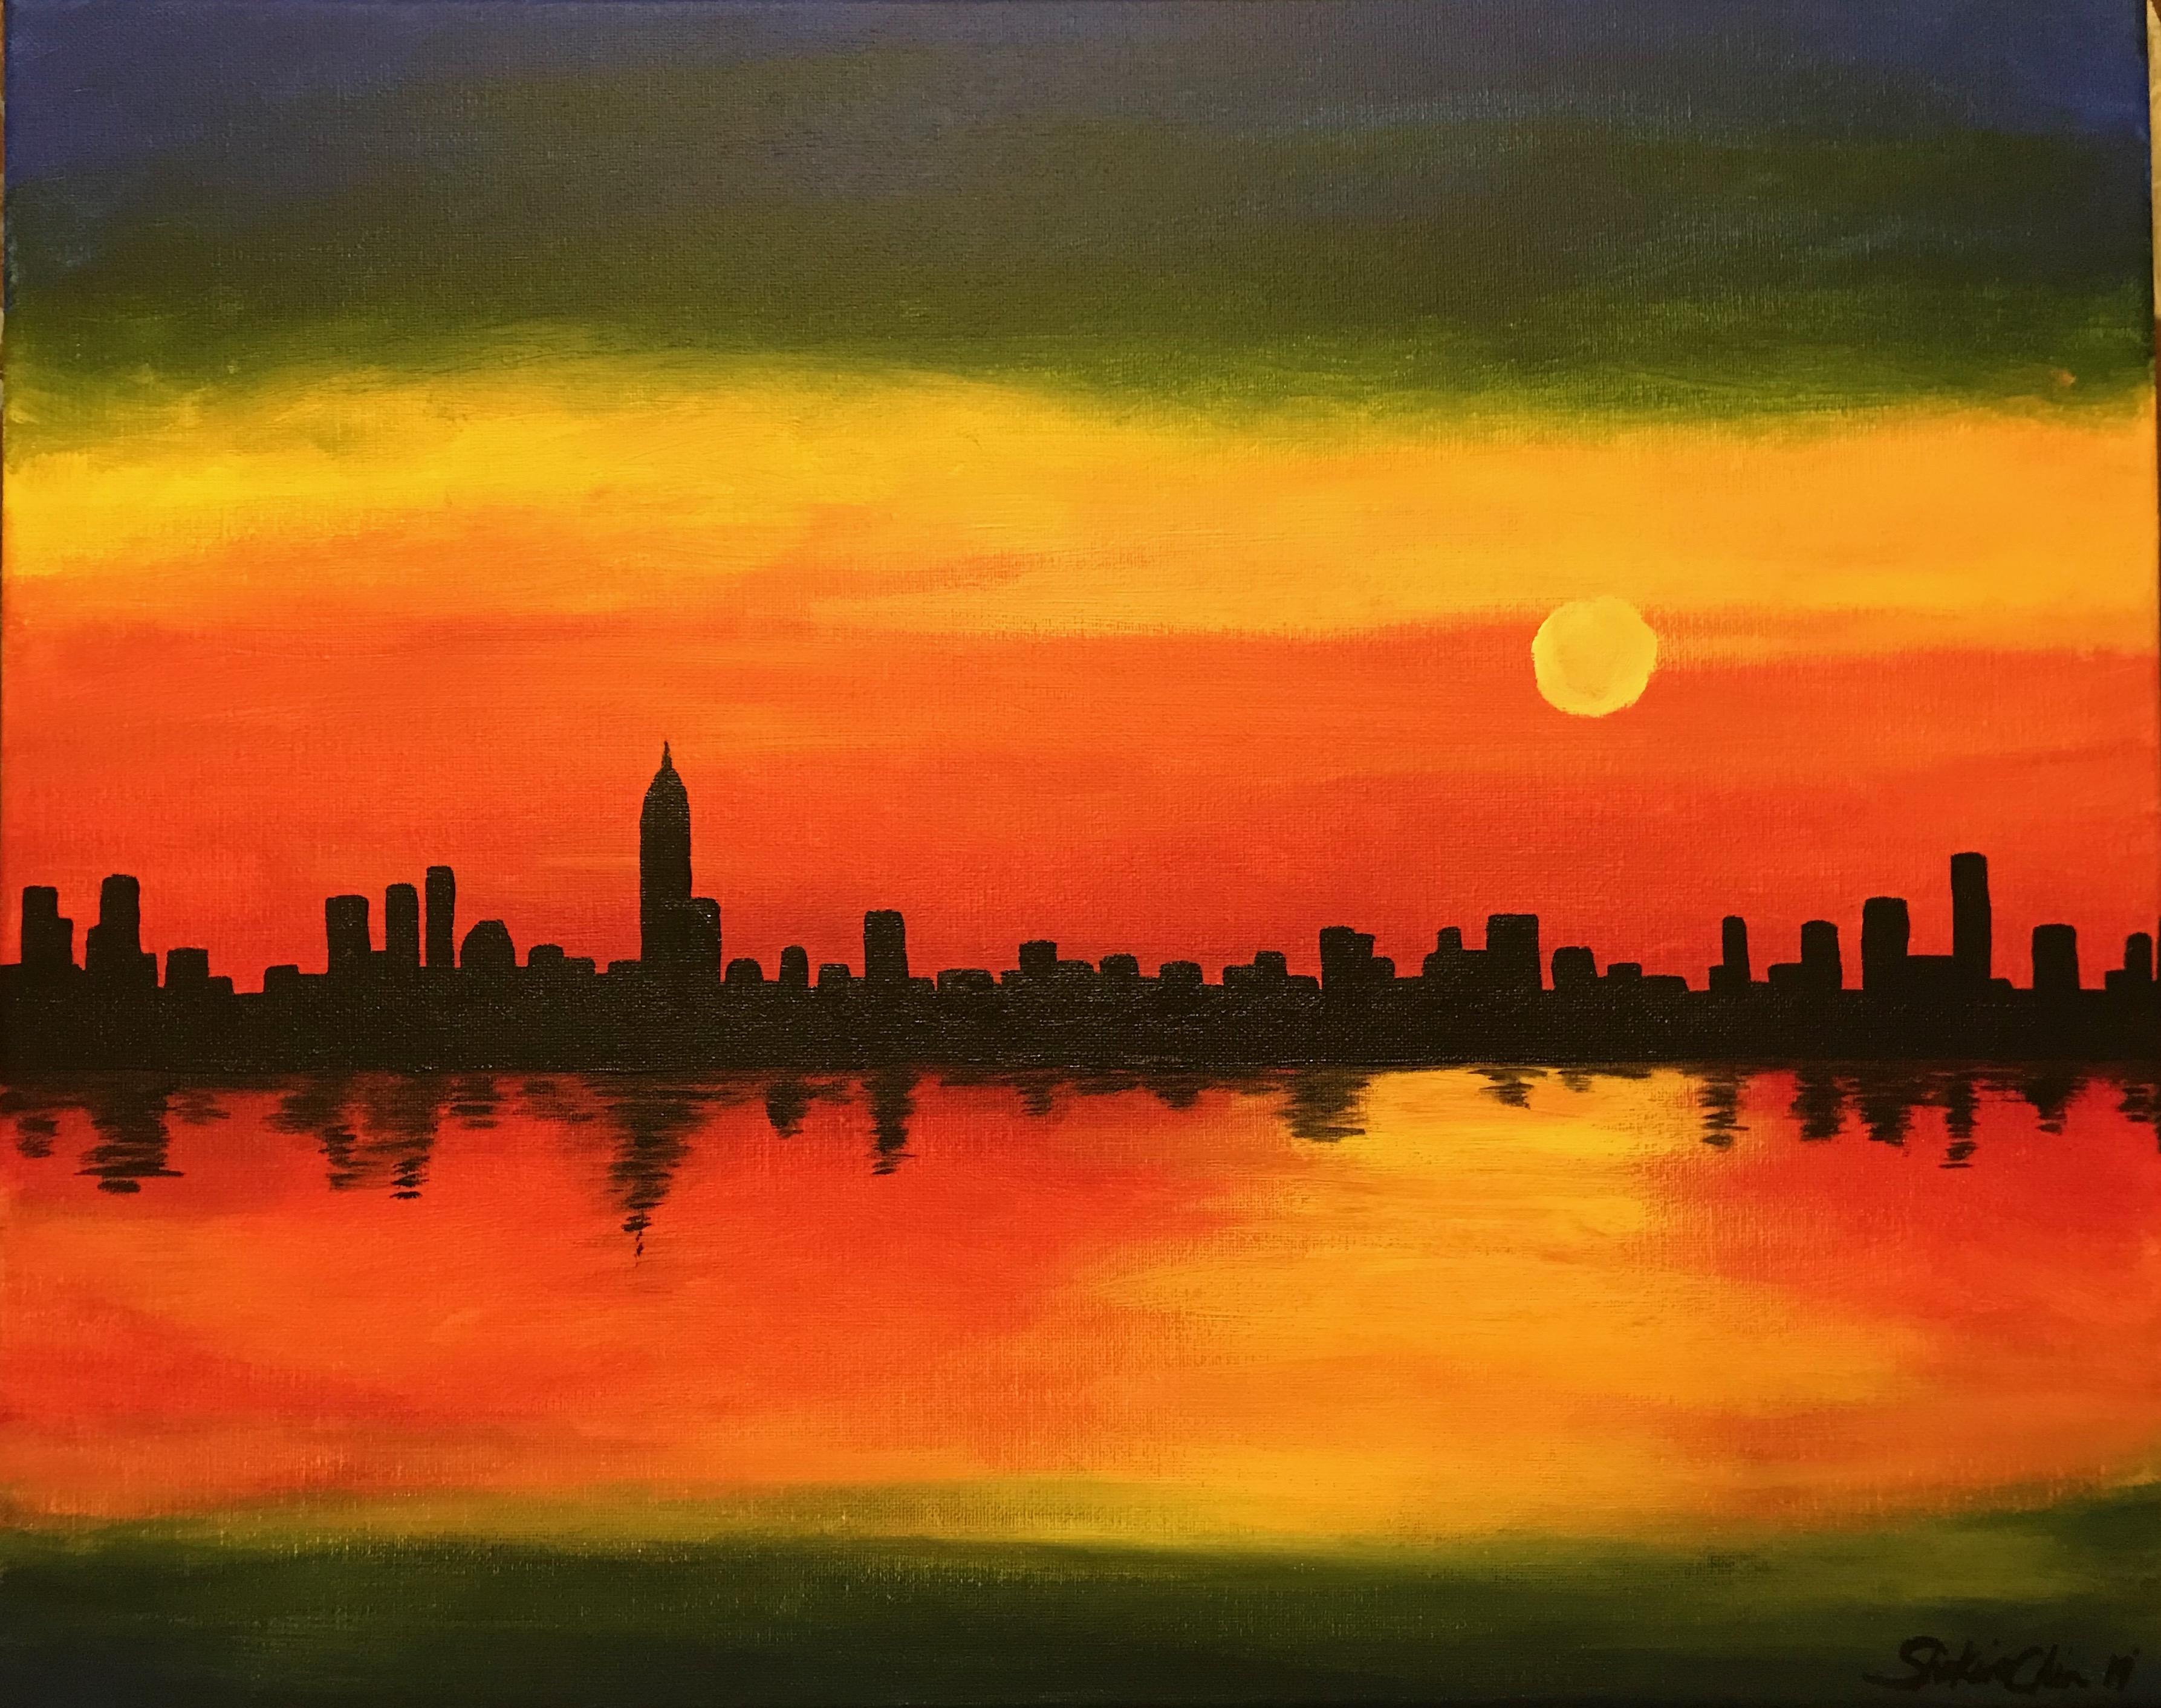 Paint and Sip Night Returns!